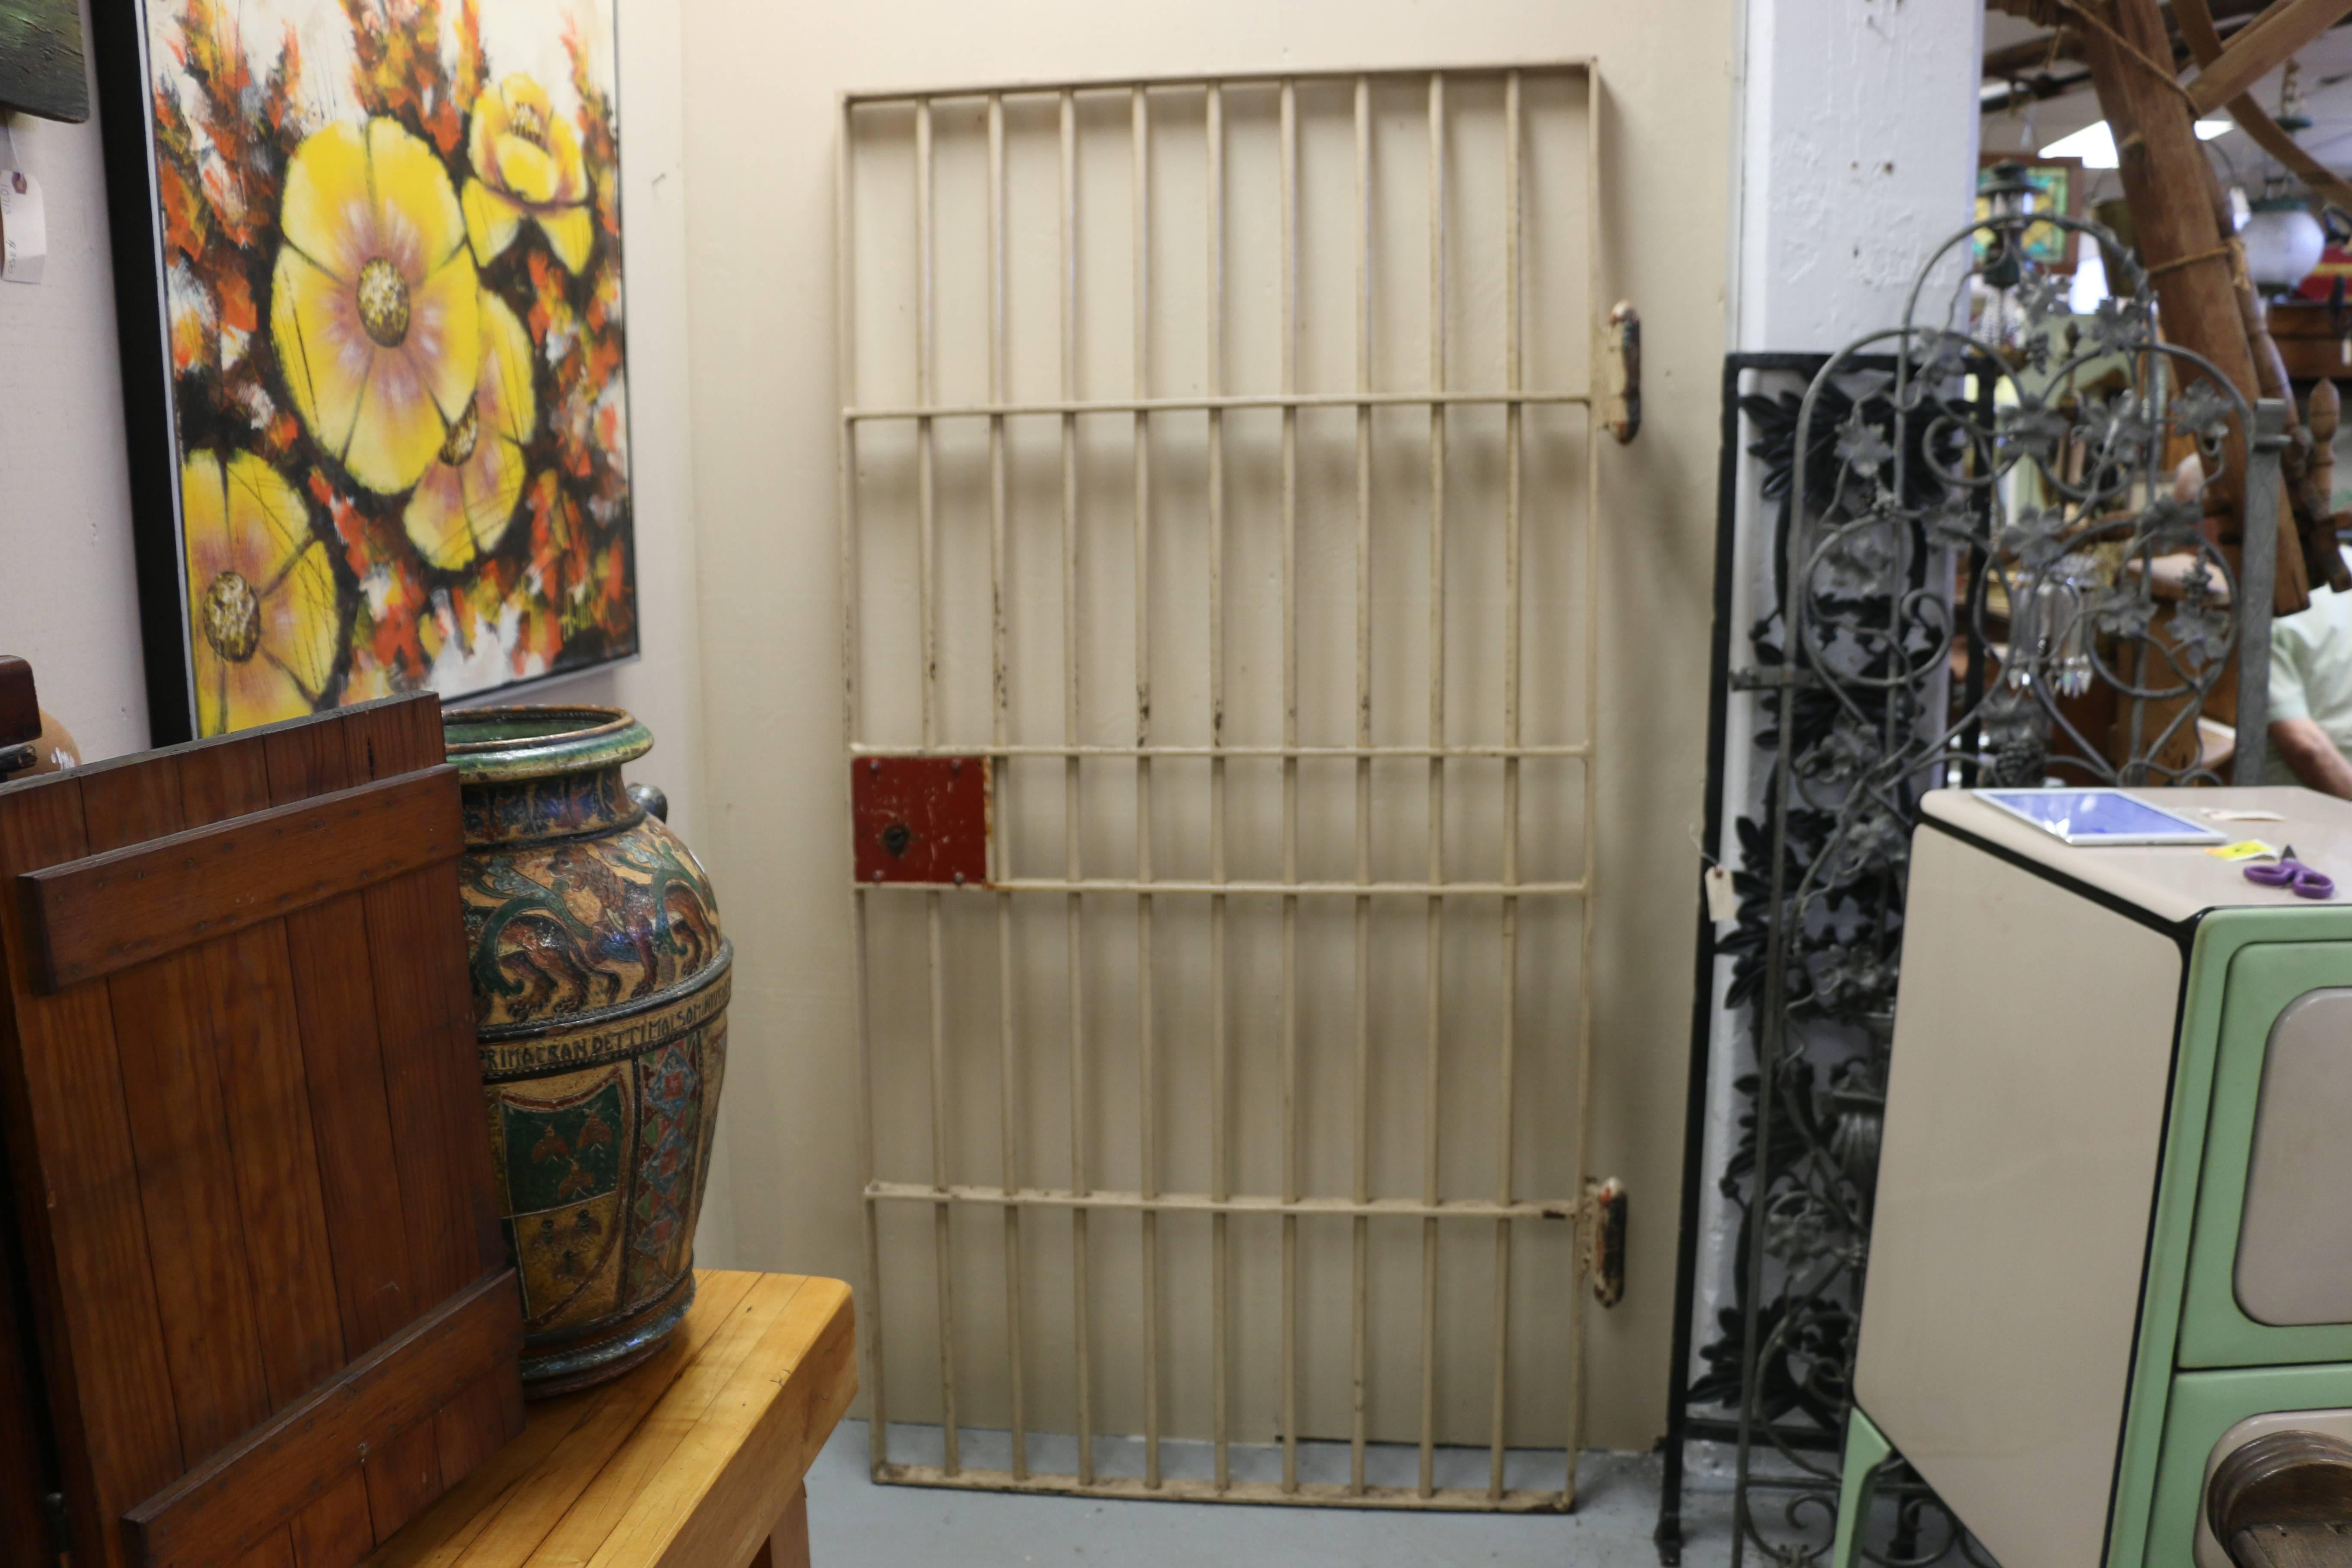 A completely authentic solid steel jail door in all original vintage condition. Very heavy with worn tan paint and red paint lock box.  Acquired in New York State. A unique and historical found object.